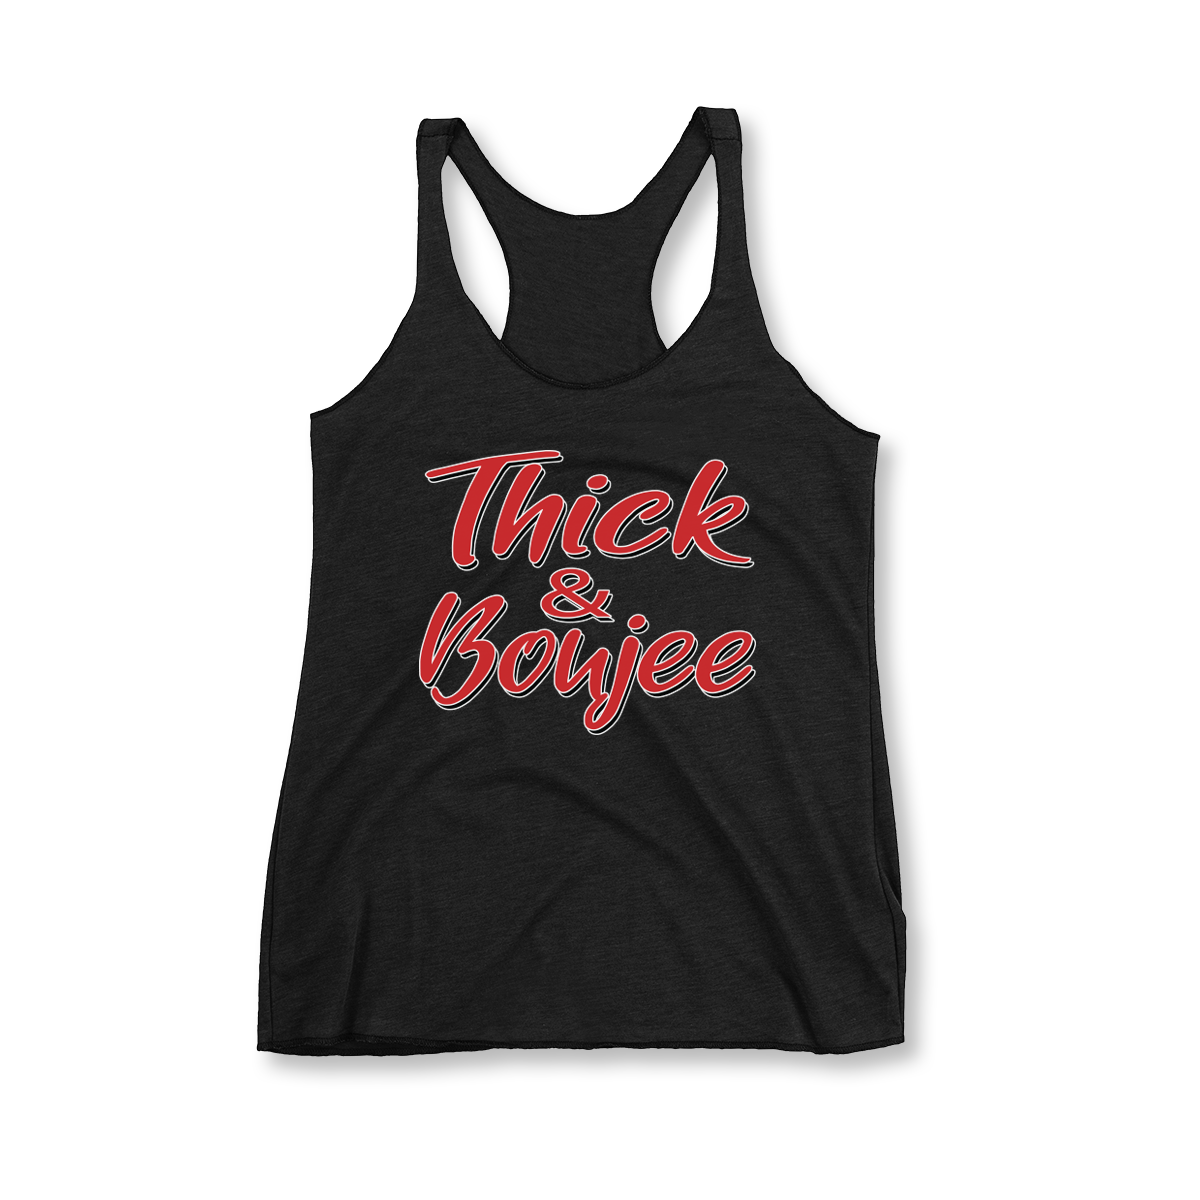 Thick & Boujee in Red Women's Racerback Tank